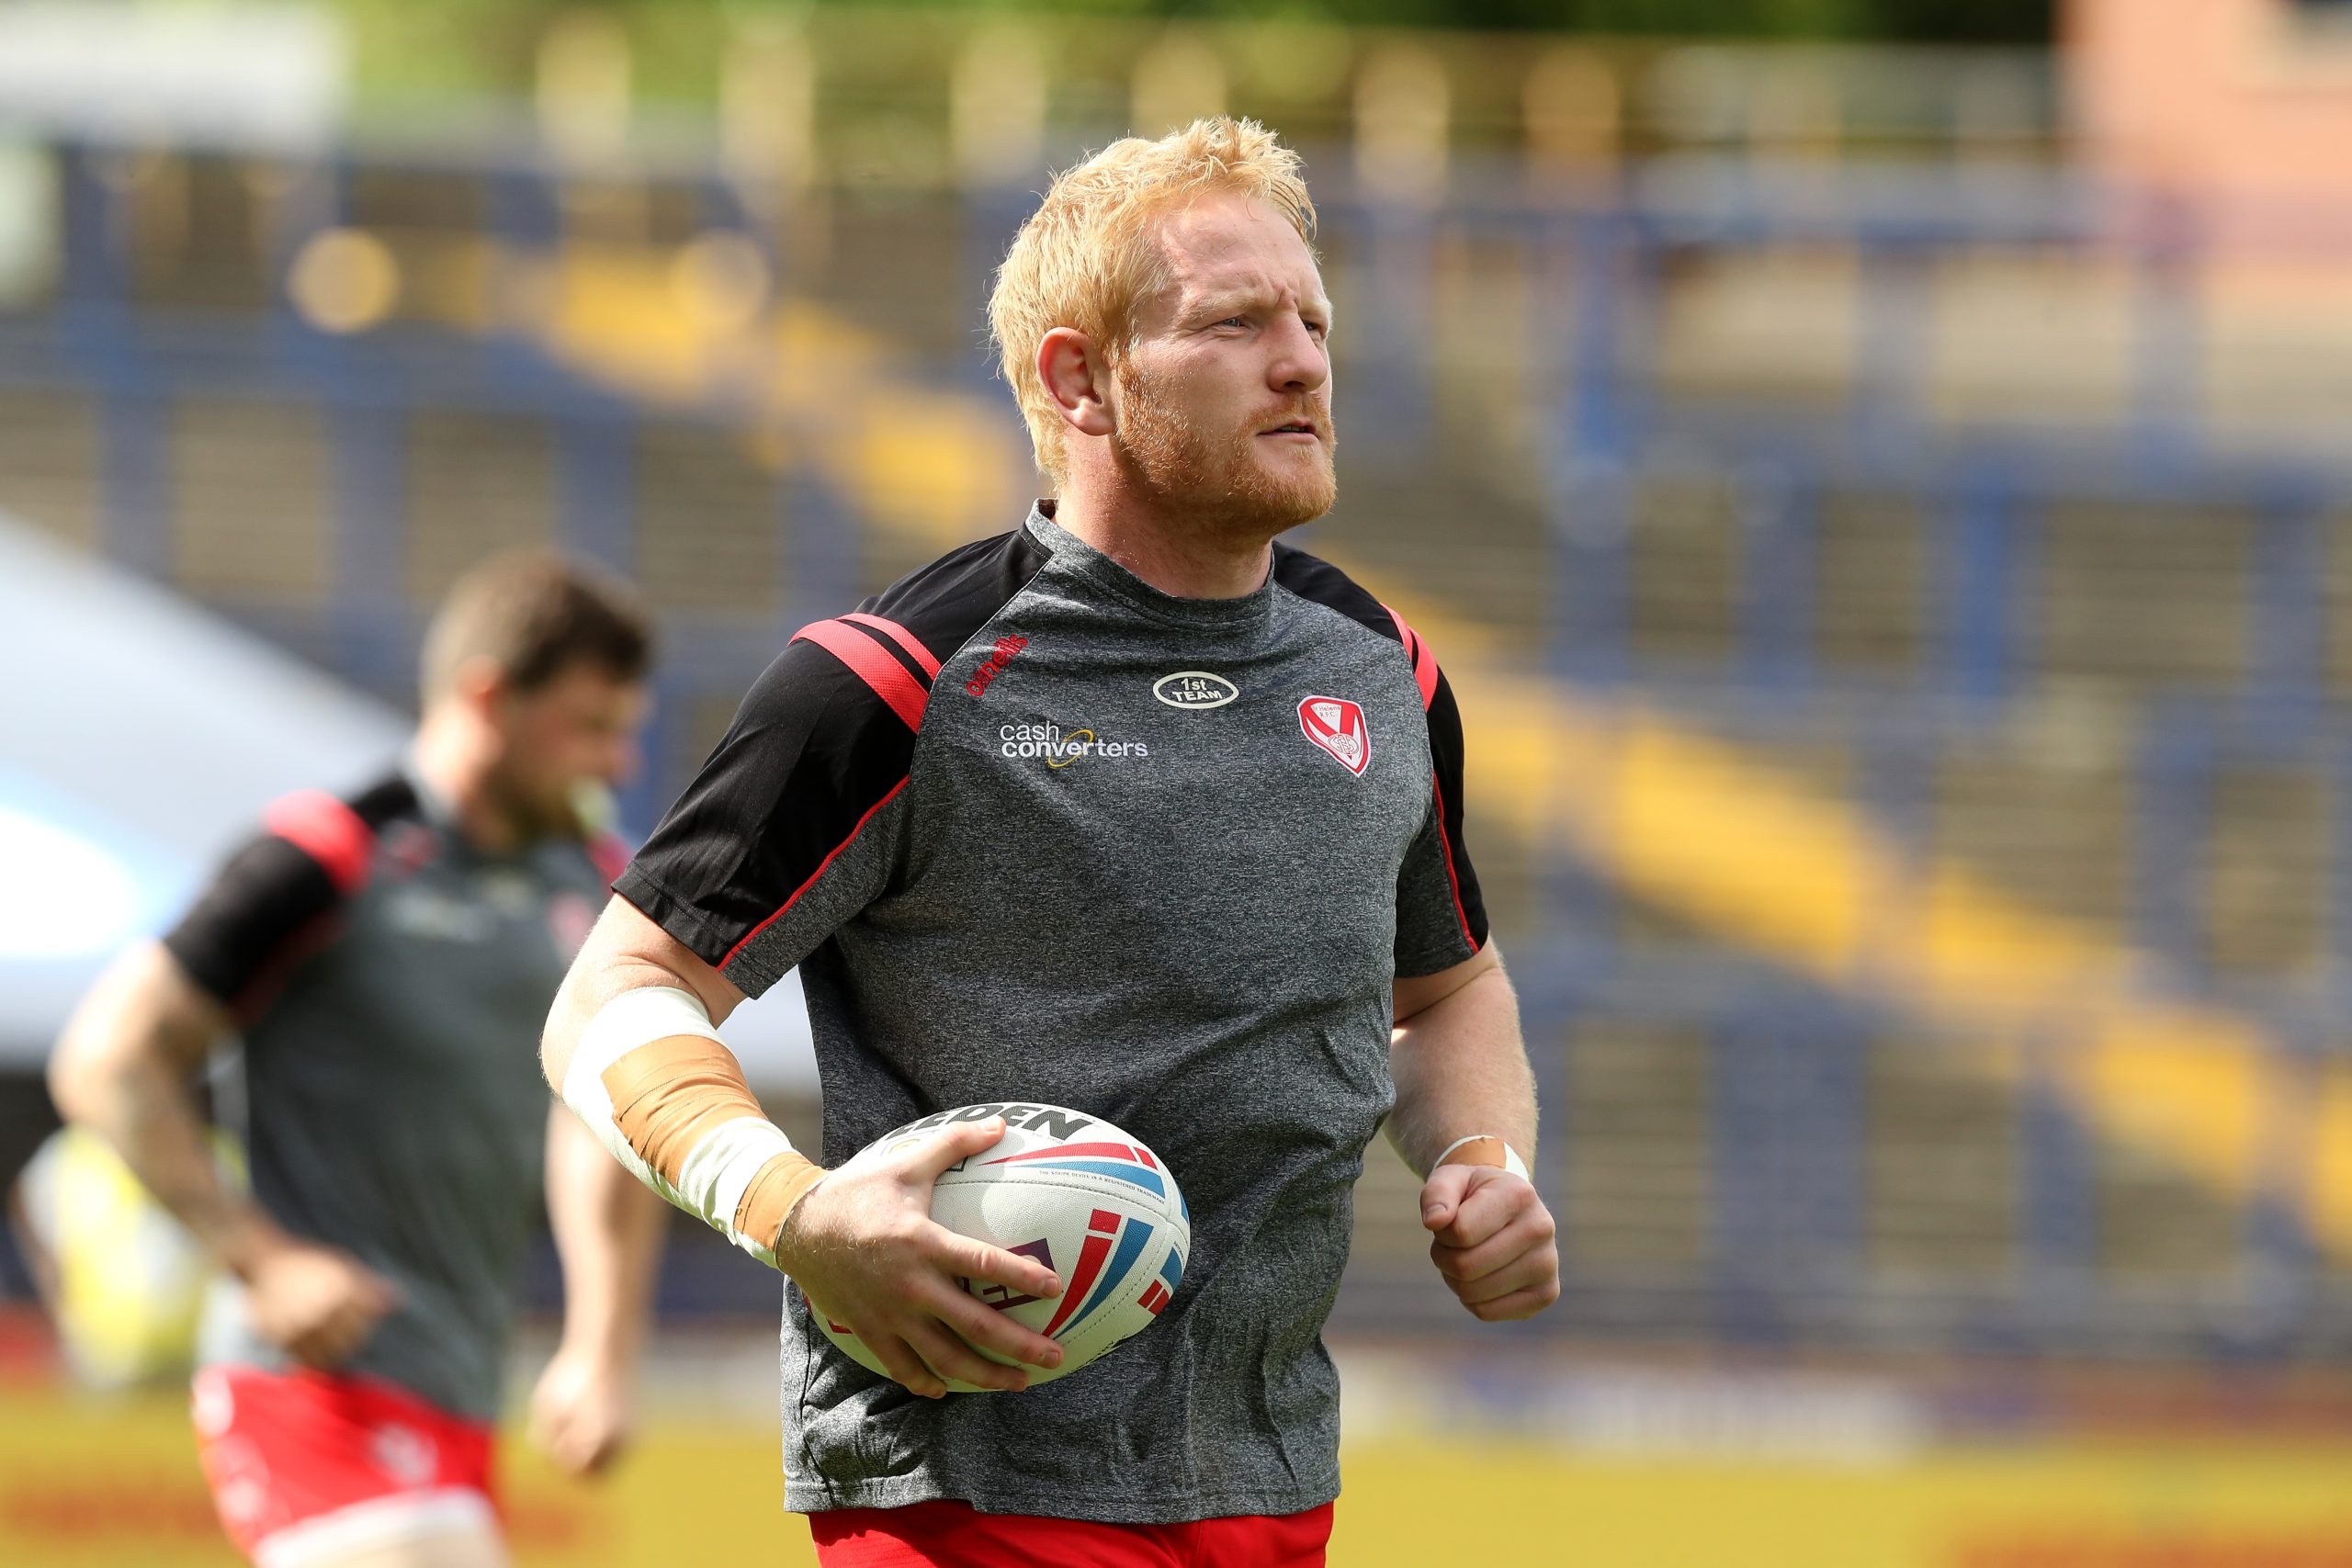 James Graham’s concerning MRI results ‘likely linked to repetitive head trauma’